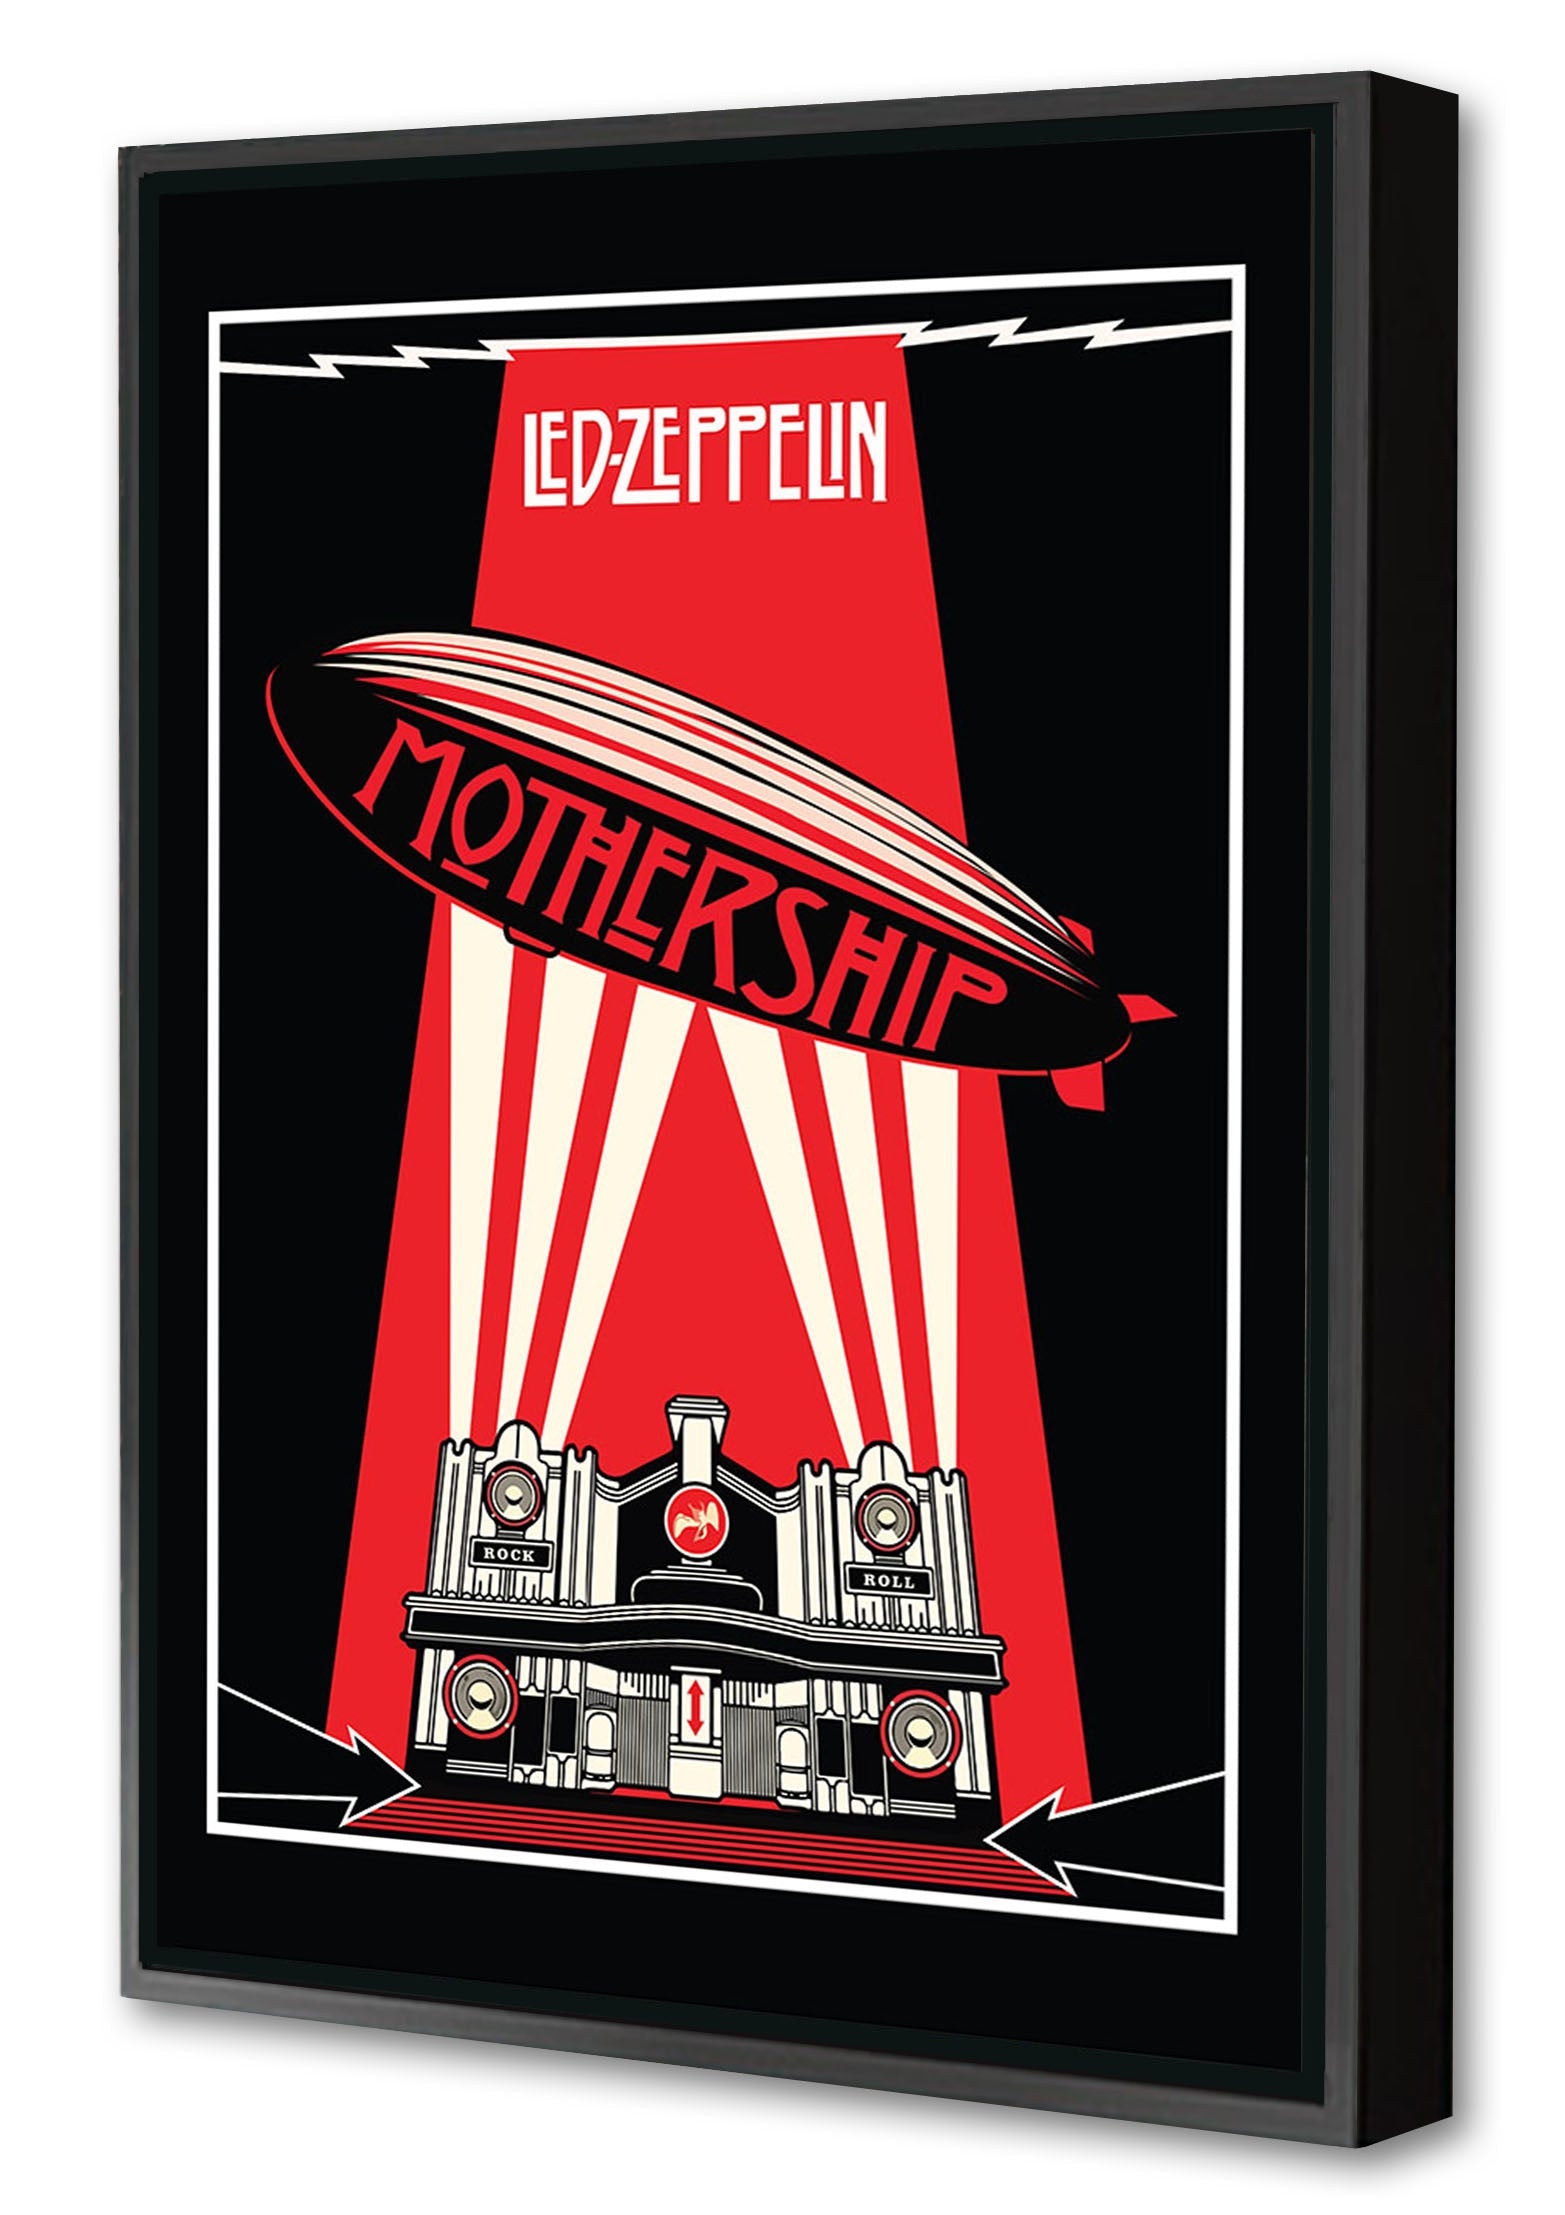 Led Zeppelin Mothership-concerts, print-Canvas Print with Box Frame-40 x 60 cm-BLUE SHAKER